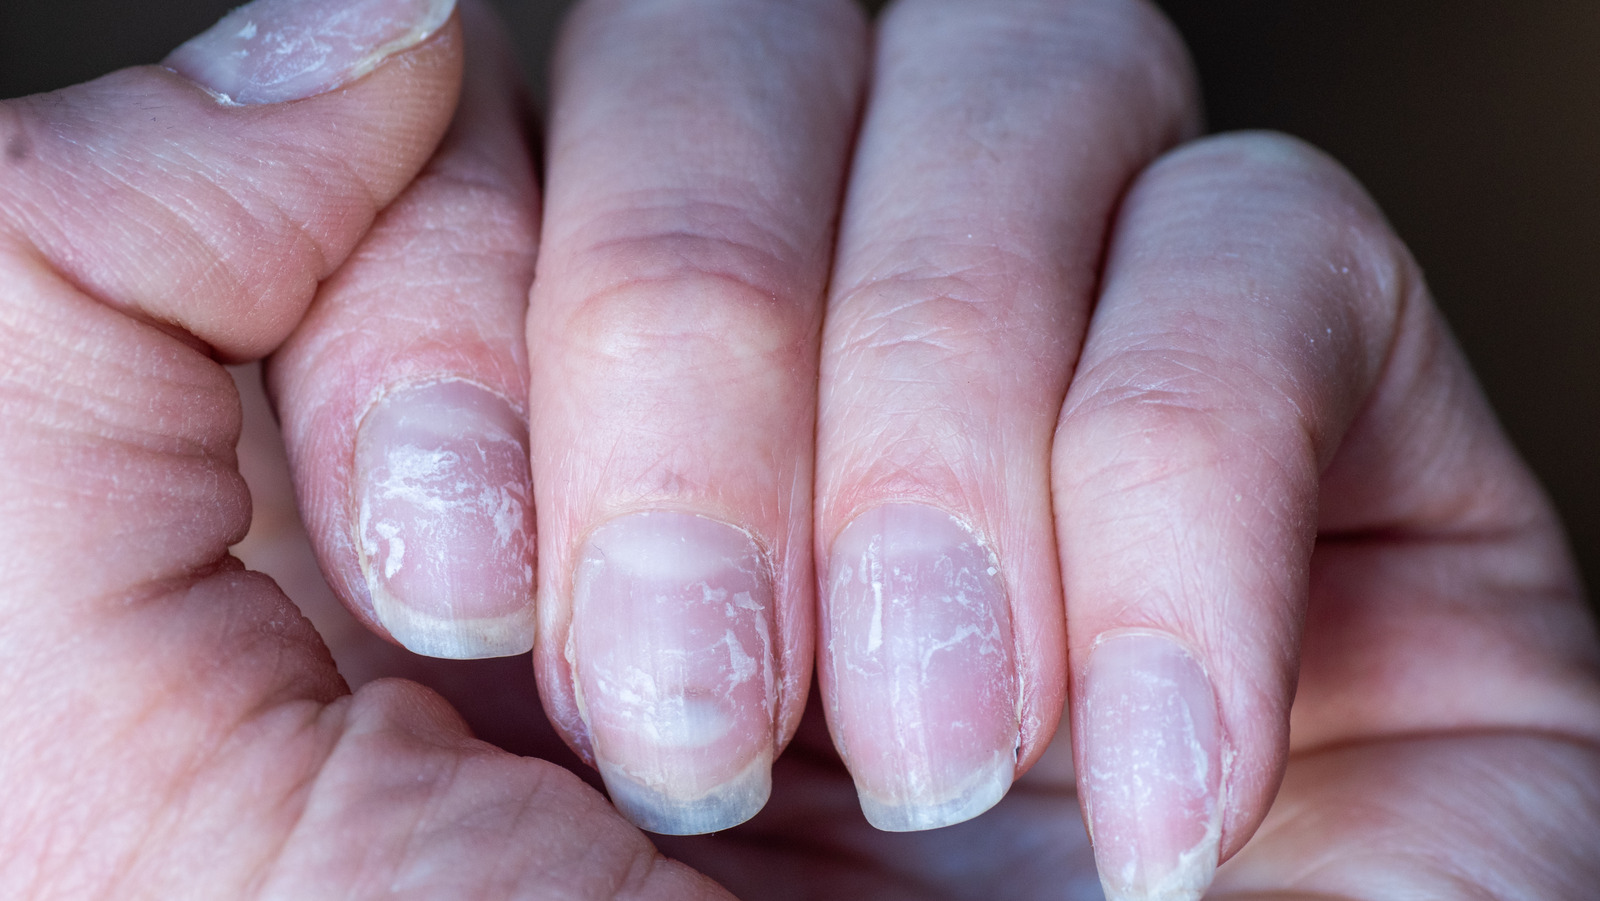 Peeling Nail Polish Removal - How You're Ruining Your Nails